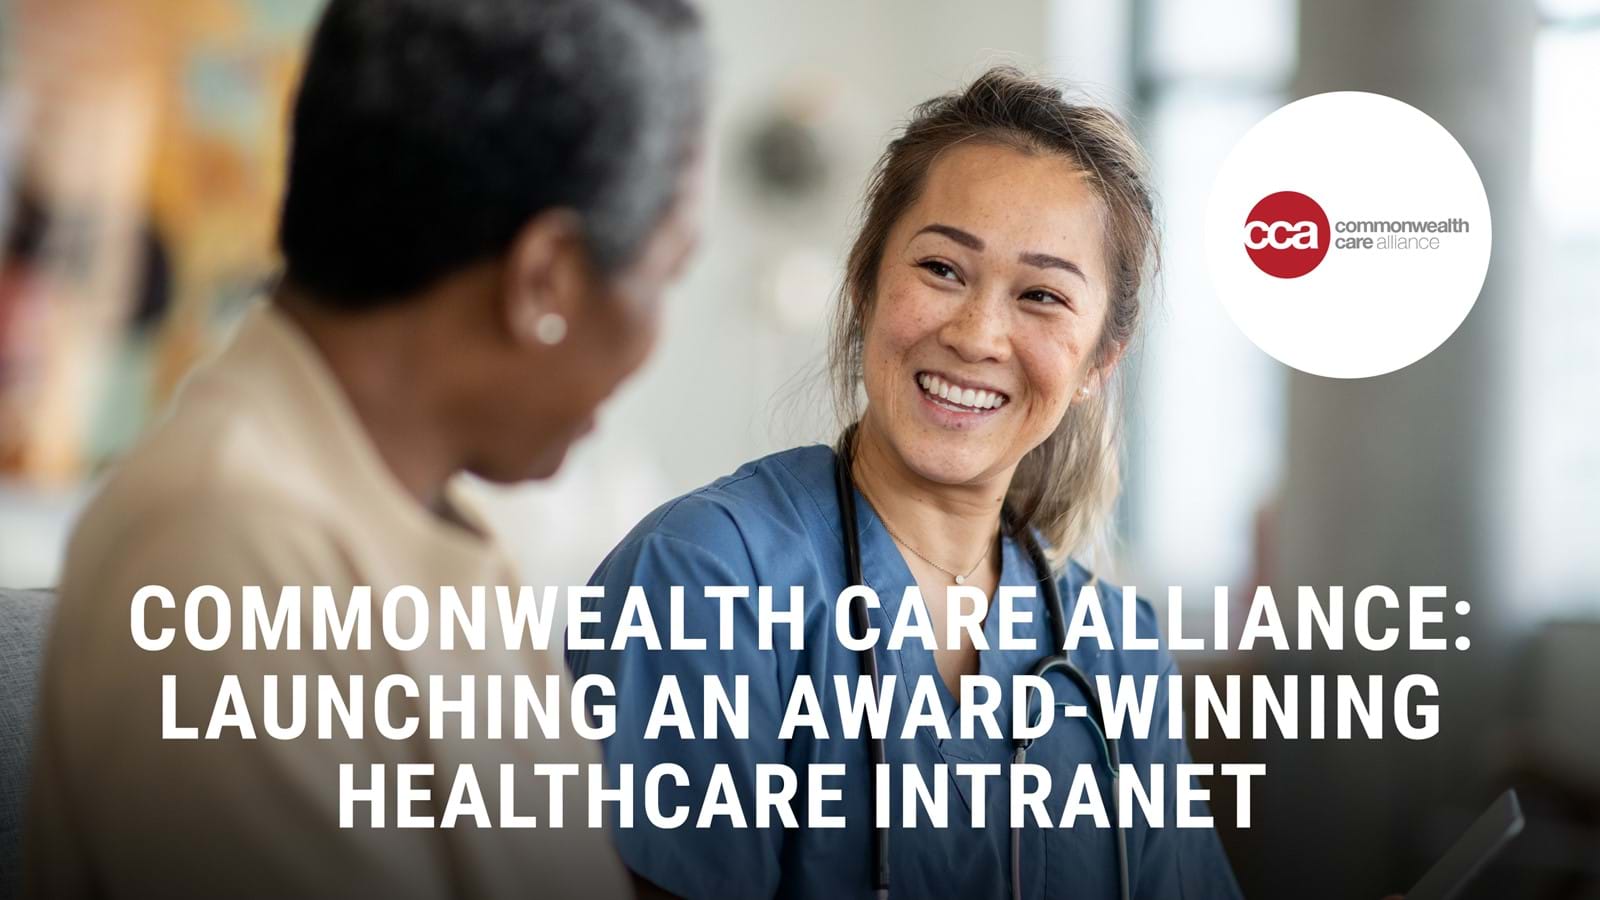 Commonwealth Care Alliance intranet case study